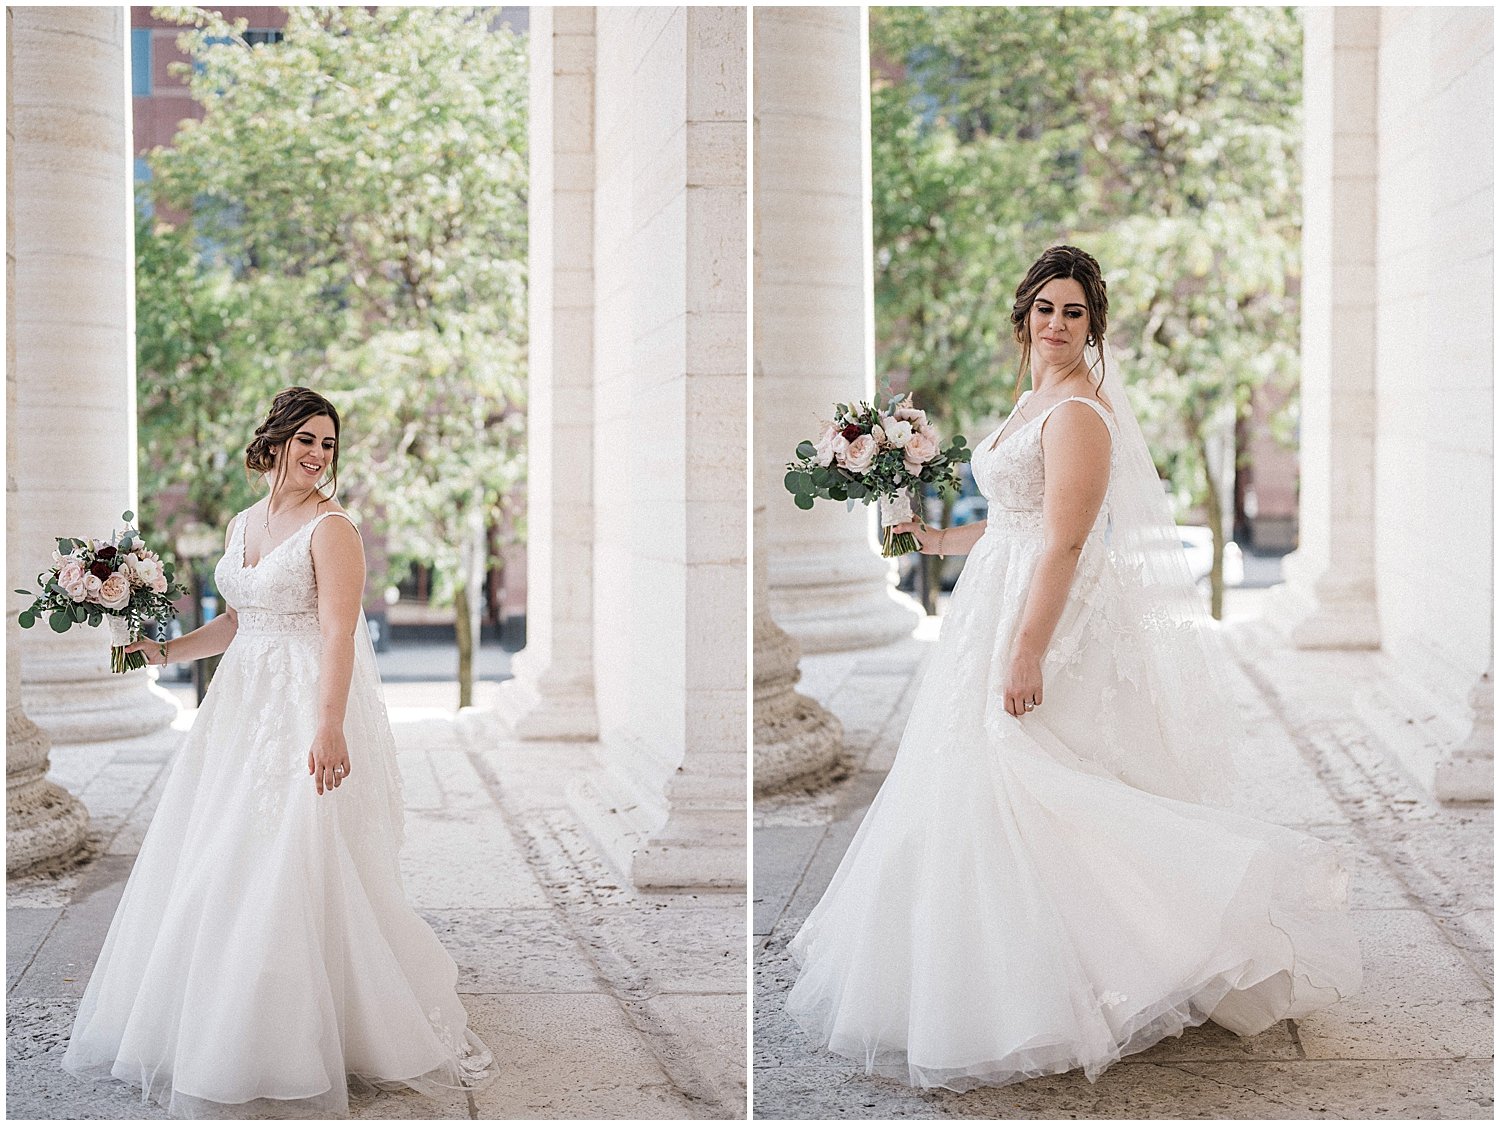 Courthouse Square Wedding Portraits | Downtown Dayton, OH